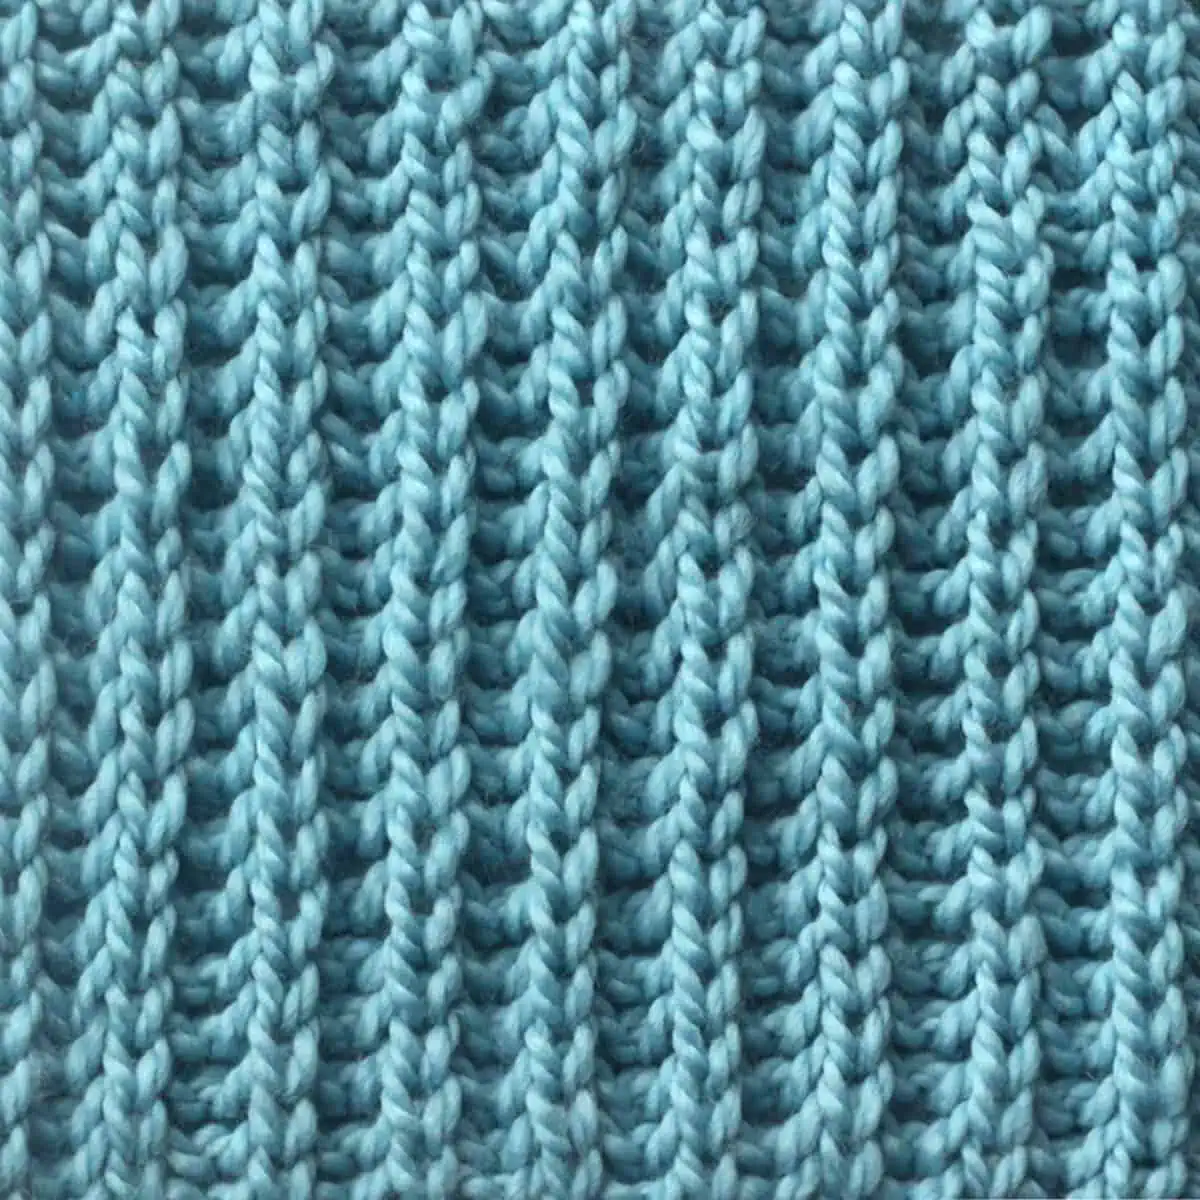 26 Lay Flat Knitting Stitches (Non-Curling) Archives - Studio Knit